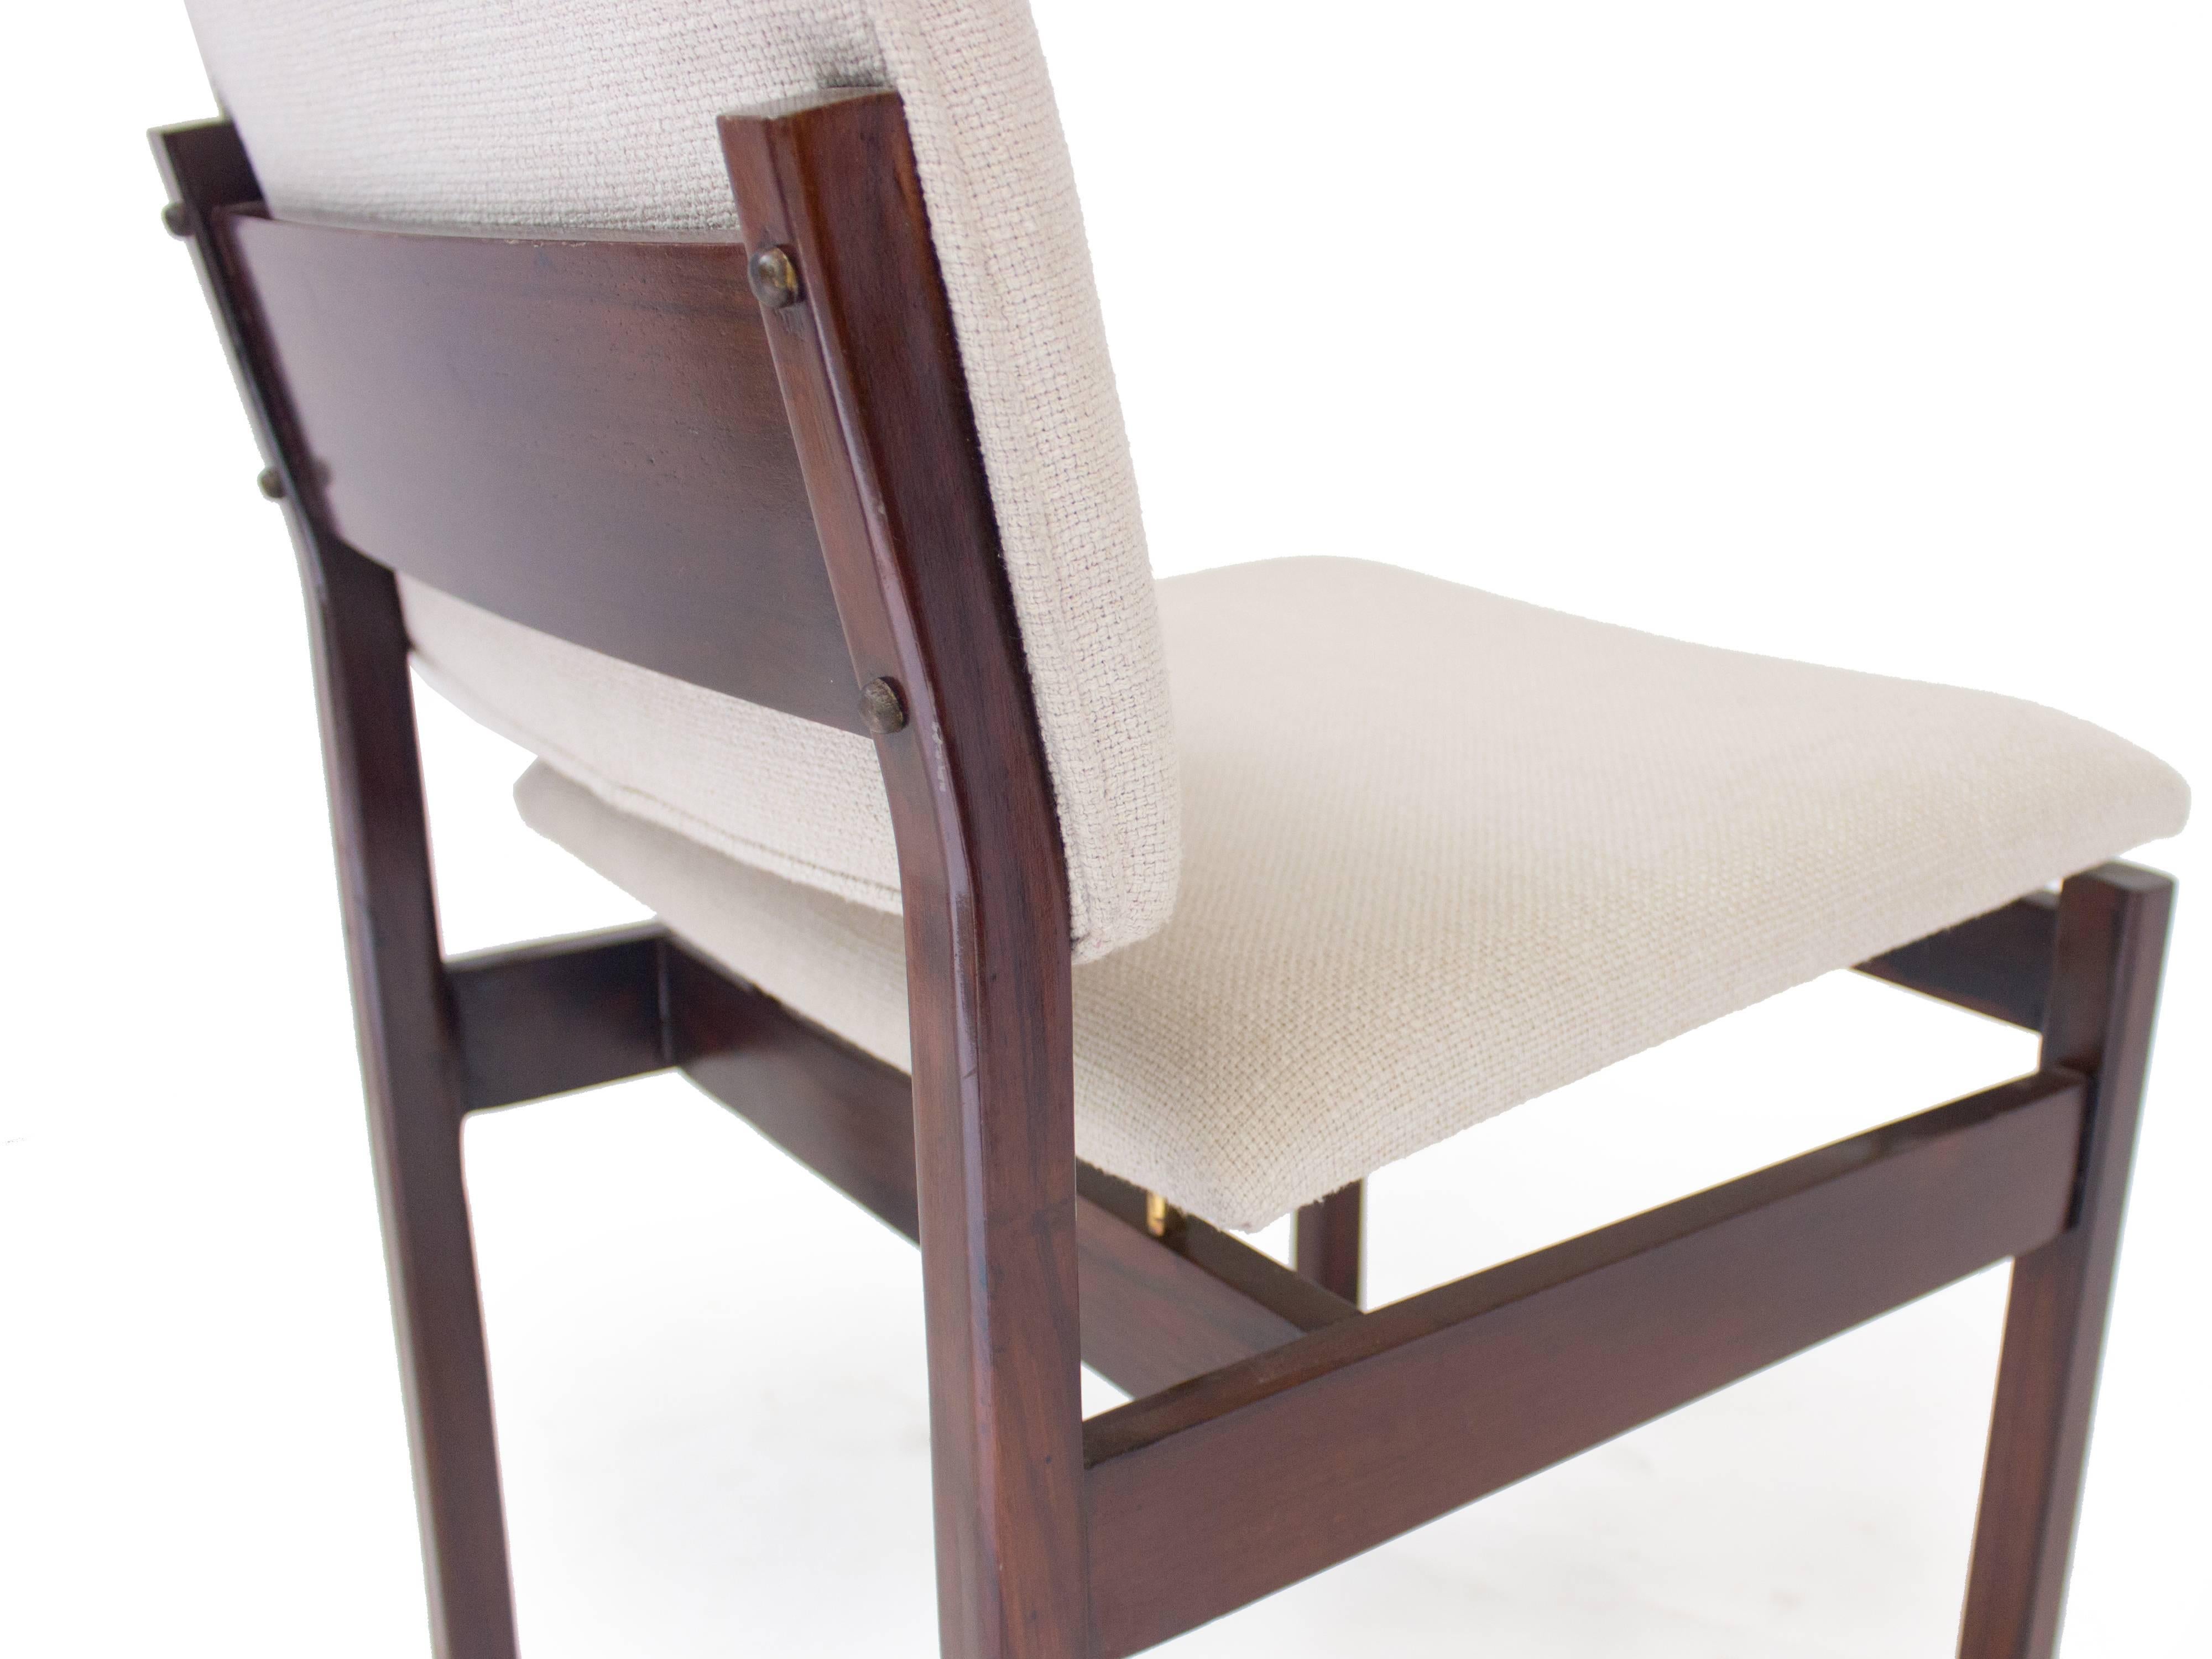 19th Century Arredamento Midcentury Chair in Brazilian Wood with Linen Upholstery, 60s